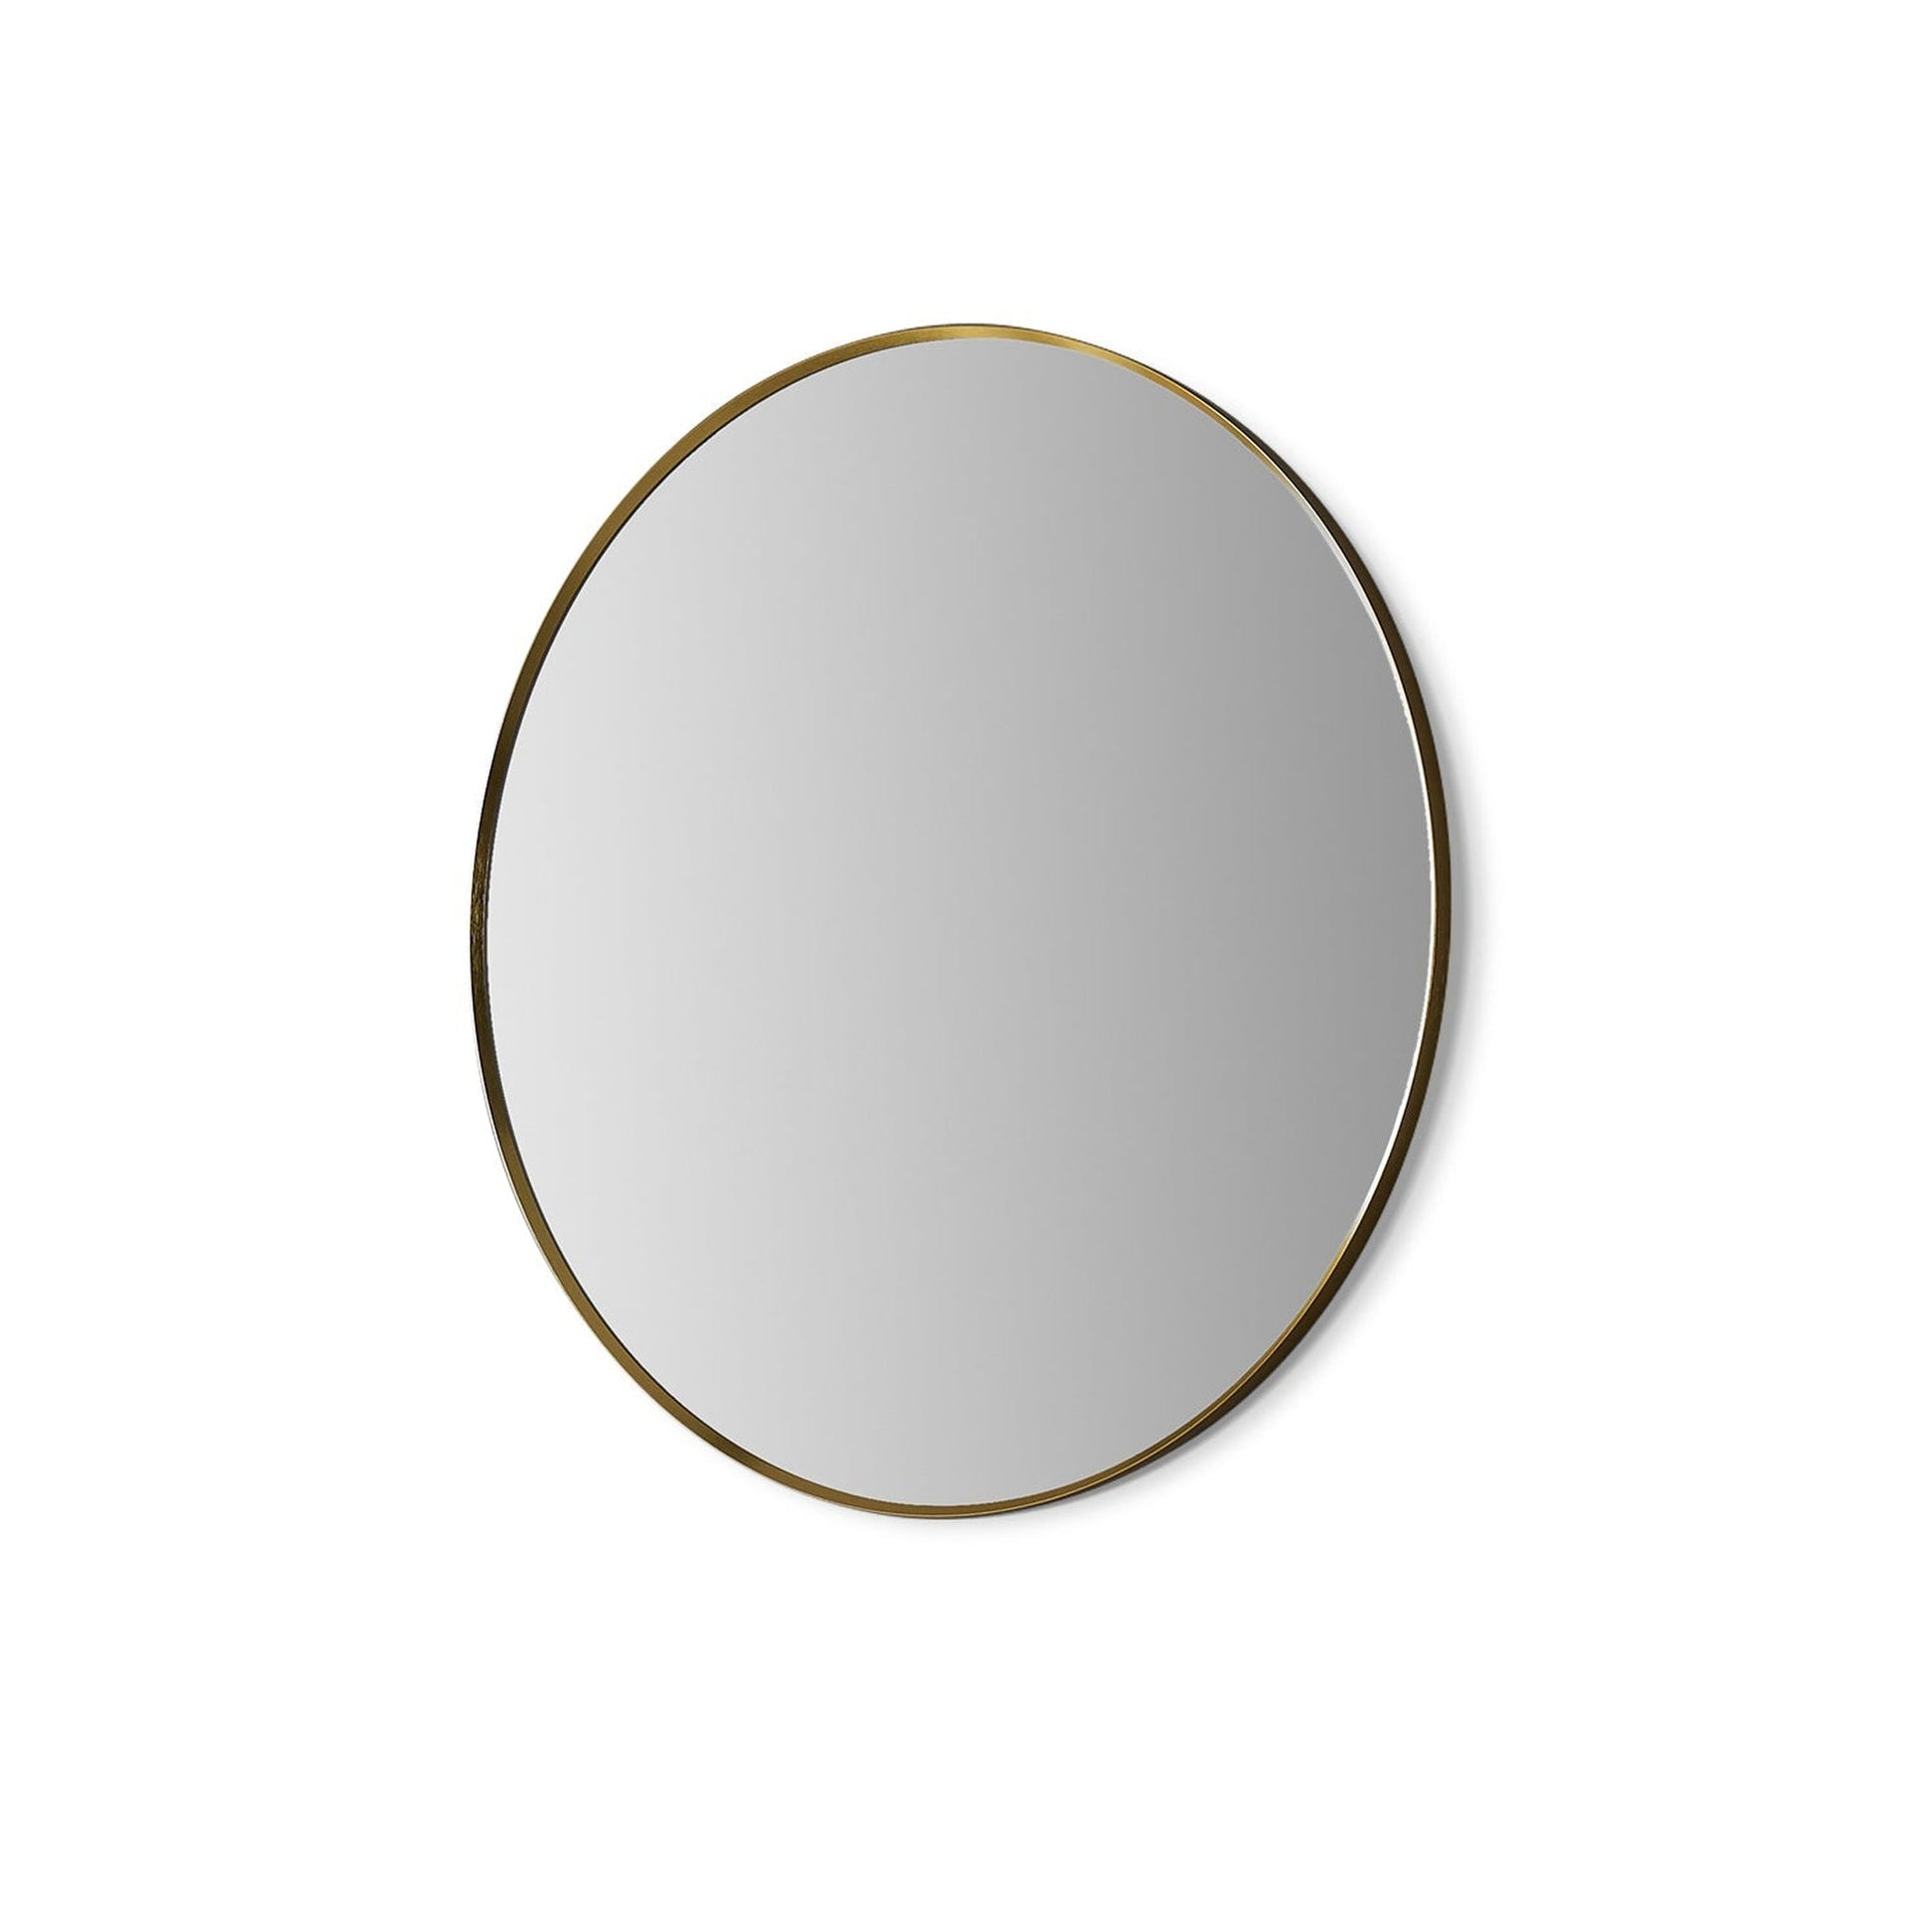 Altair Liceo 30" Round Brushed Gold Aluminum Framed Wall-Mounted Mirror